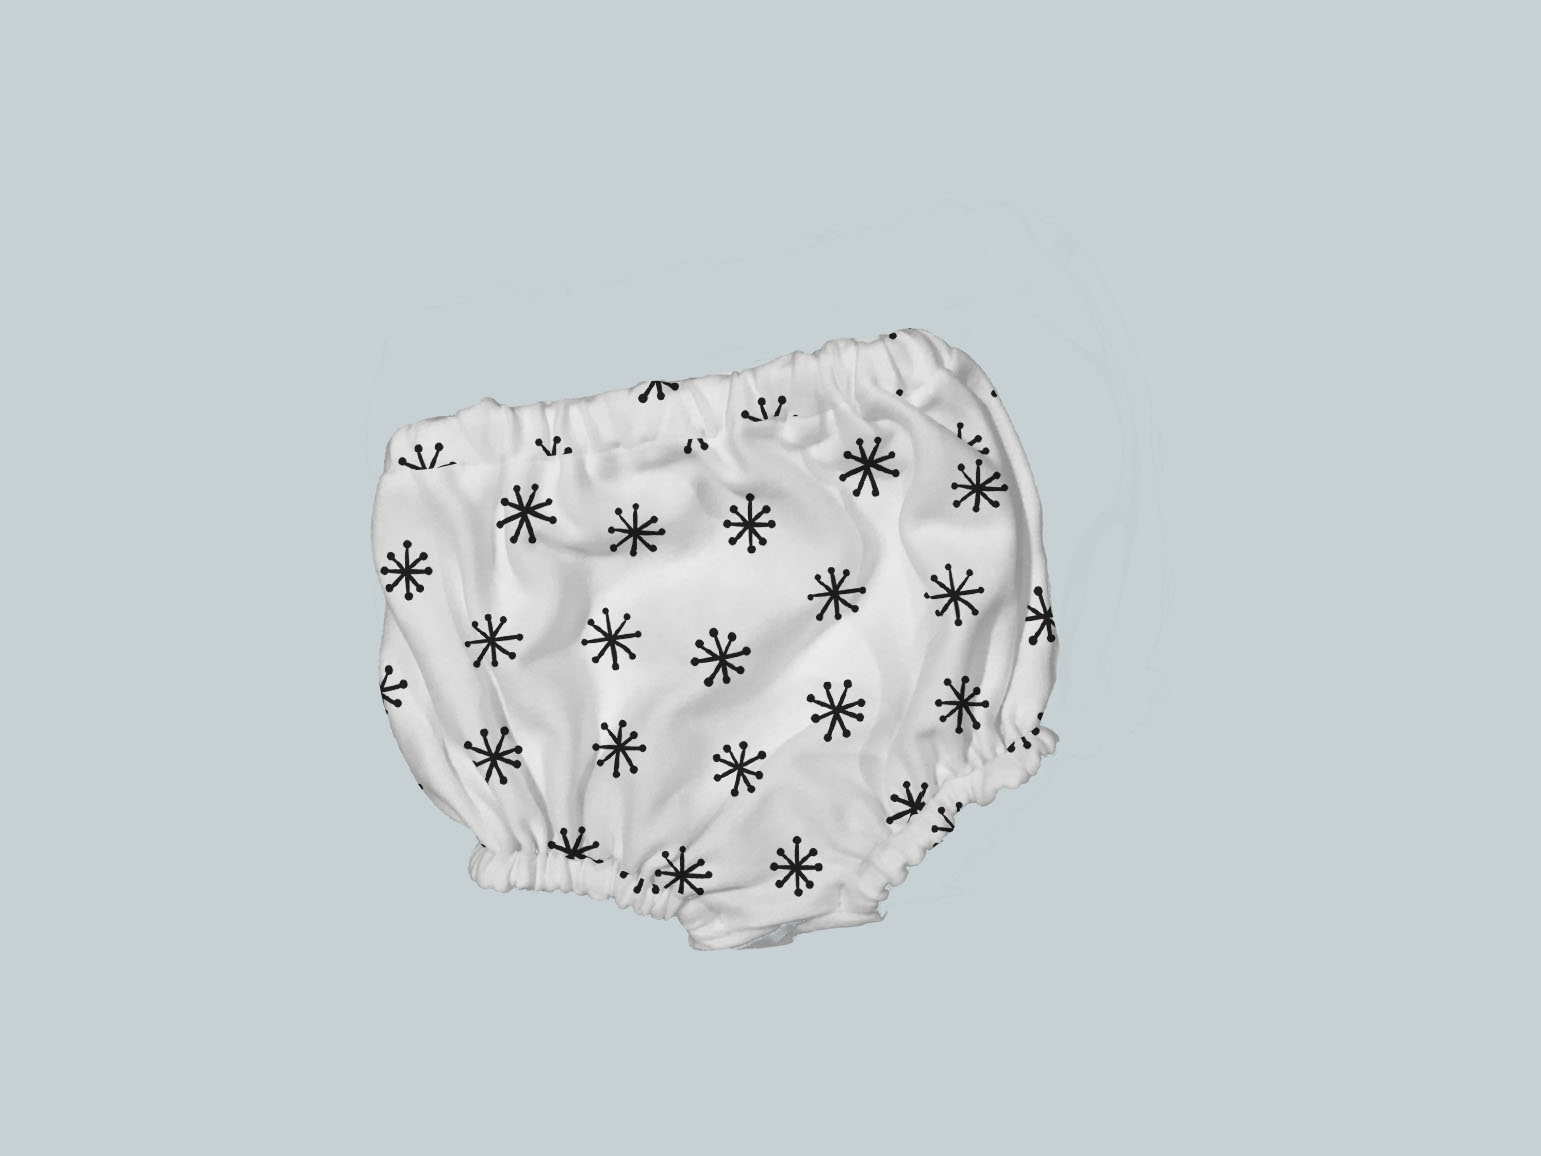 Bummies/Diaper Cover - Starbright